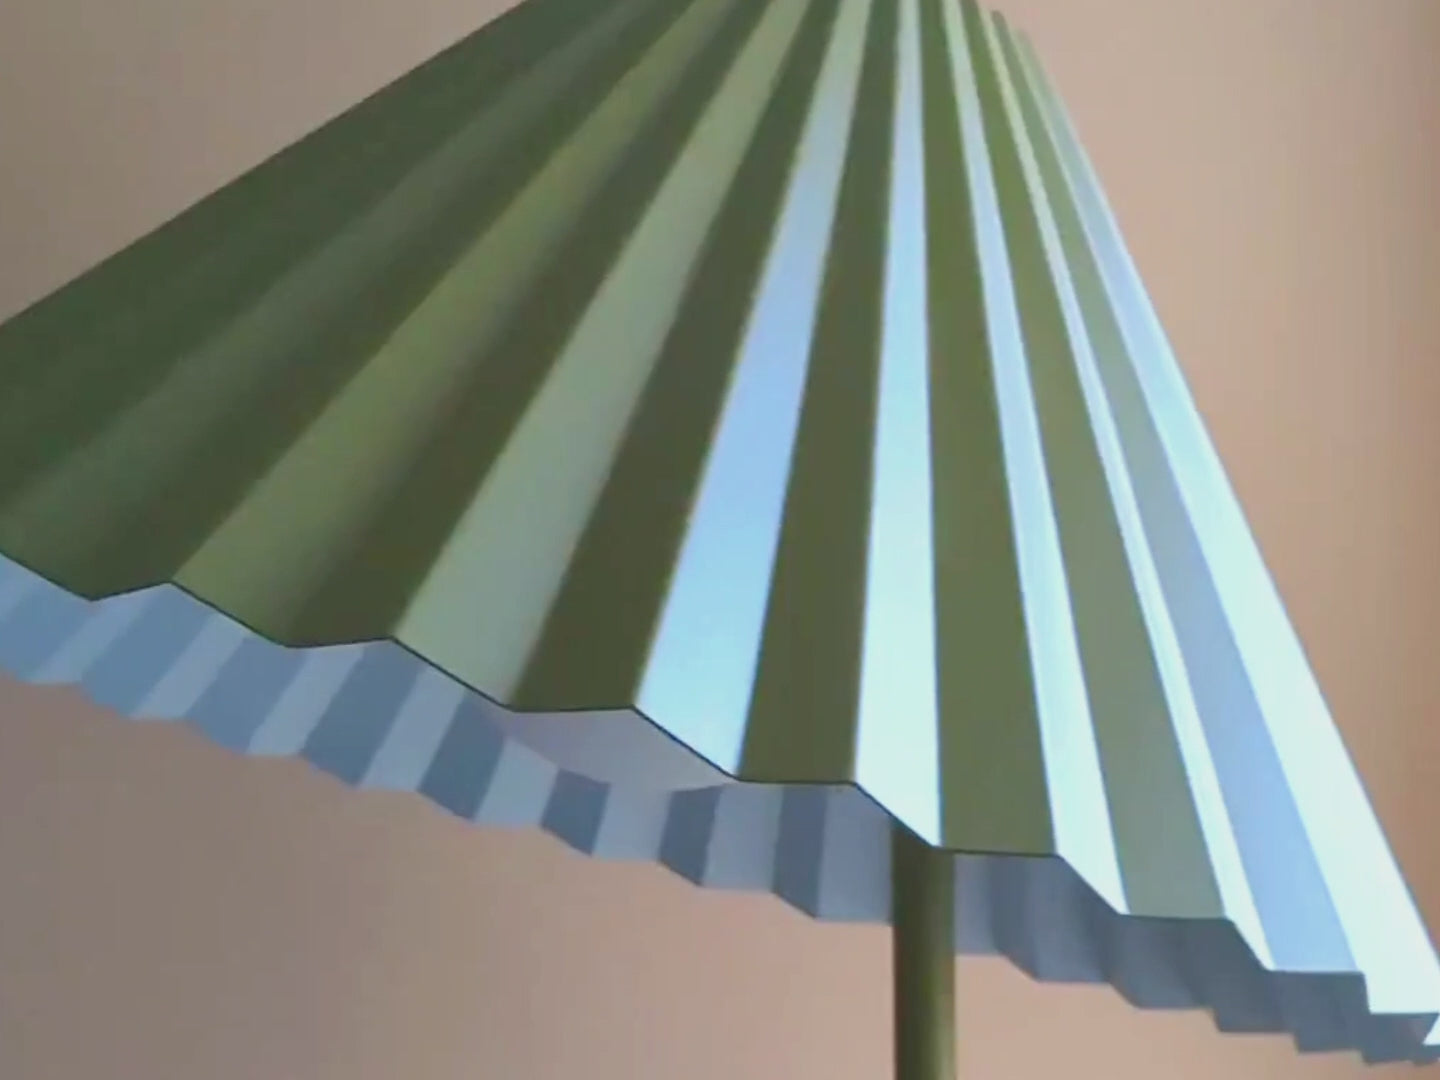 A floor lamp with a fluted, pleated metal shade that can be tilted and adjusted. It is painted moss green, with a contrasting pale blue colour inside the shade.